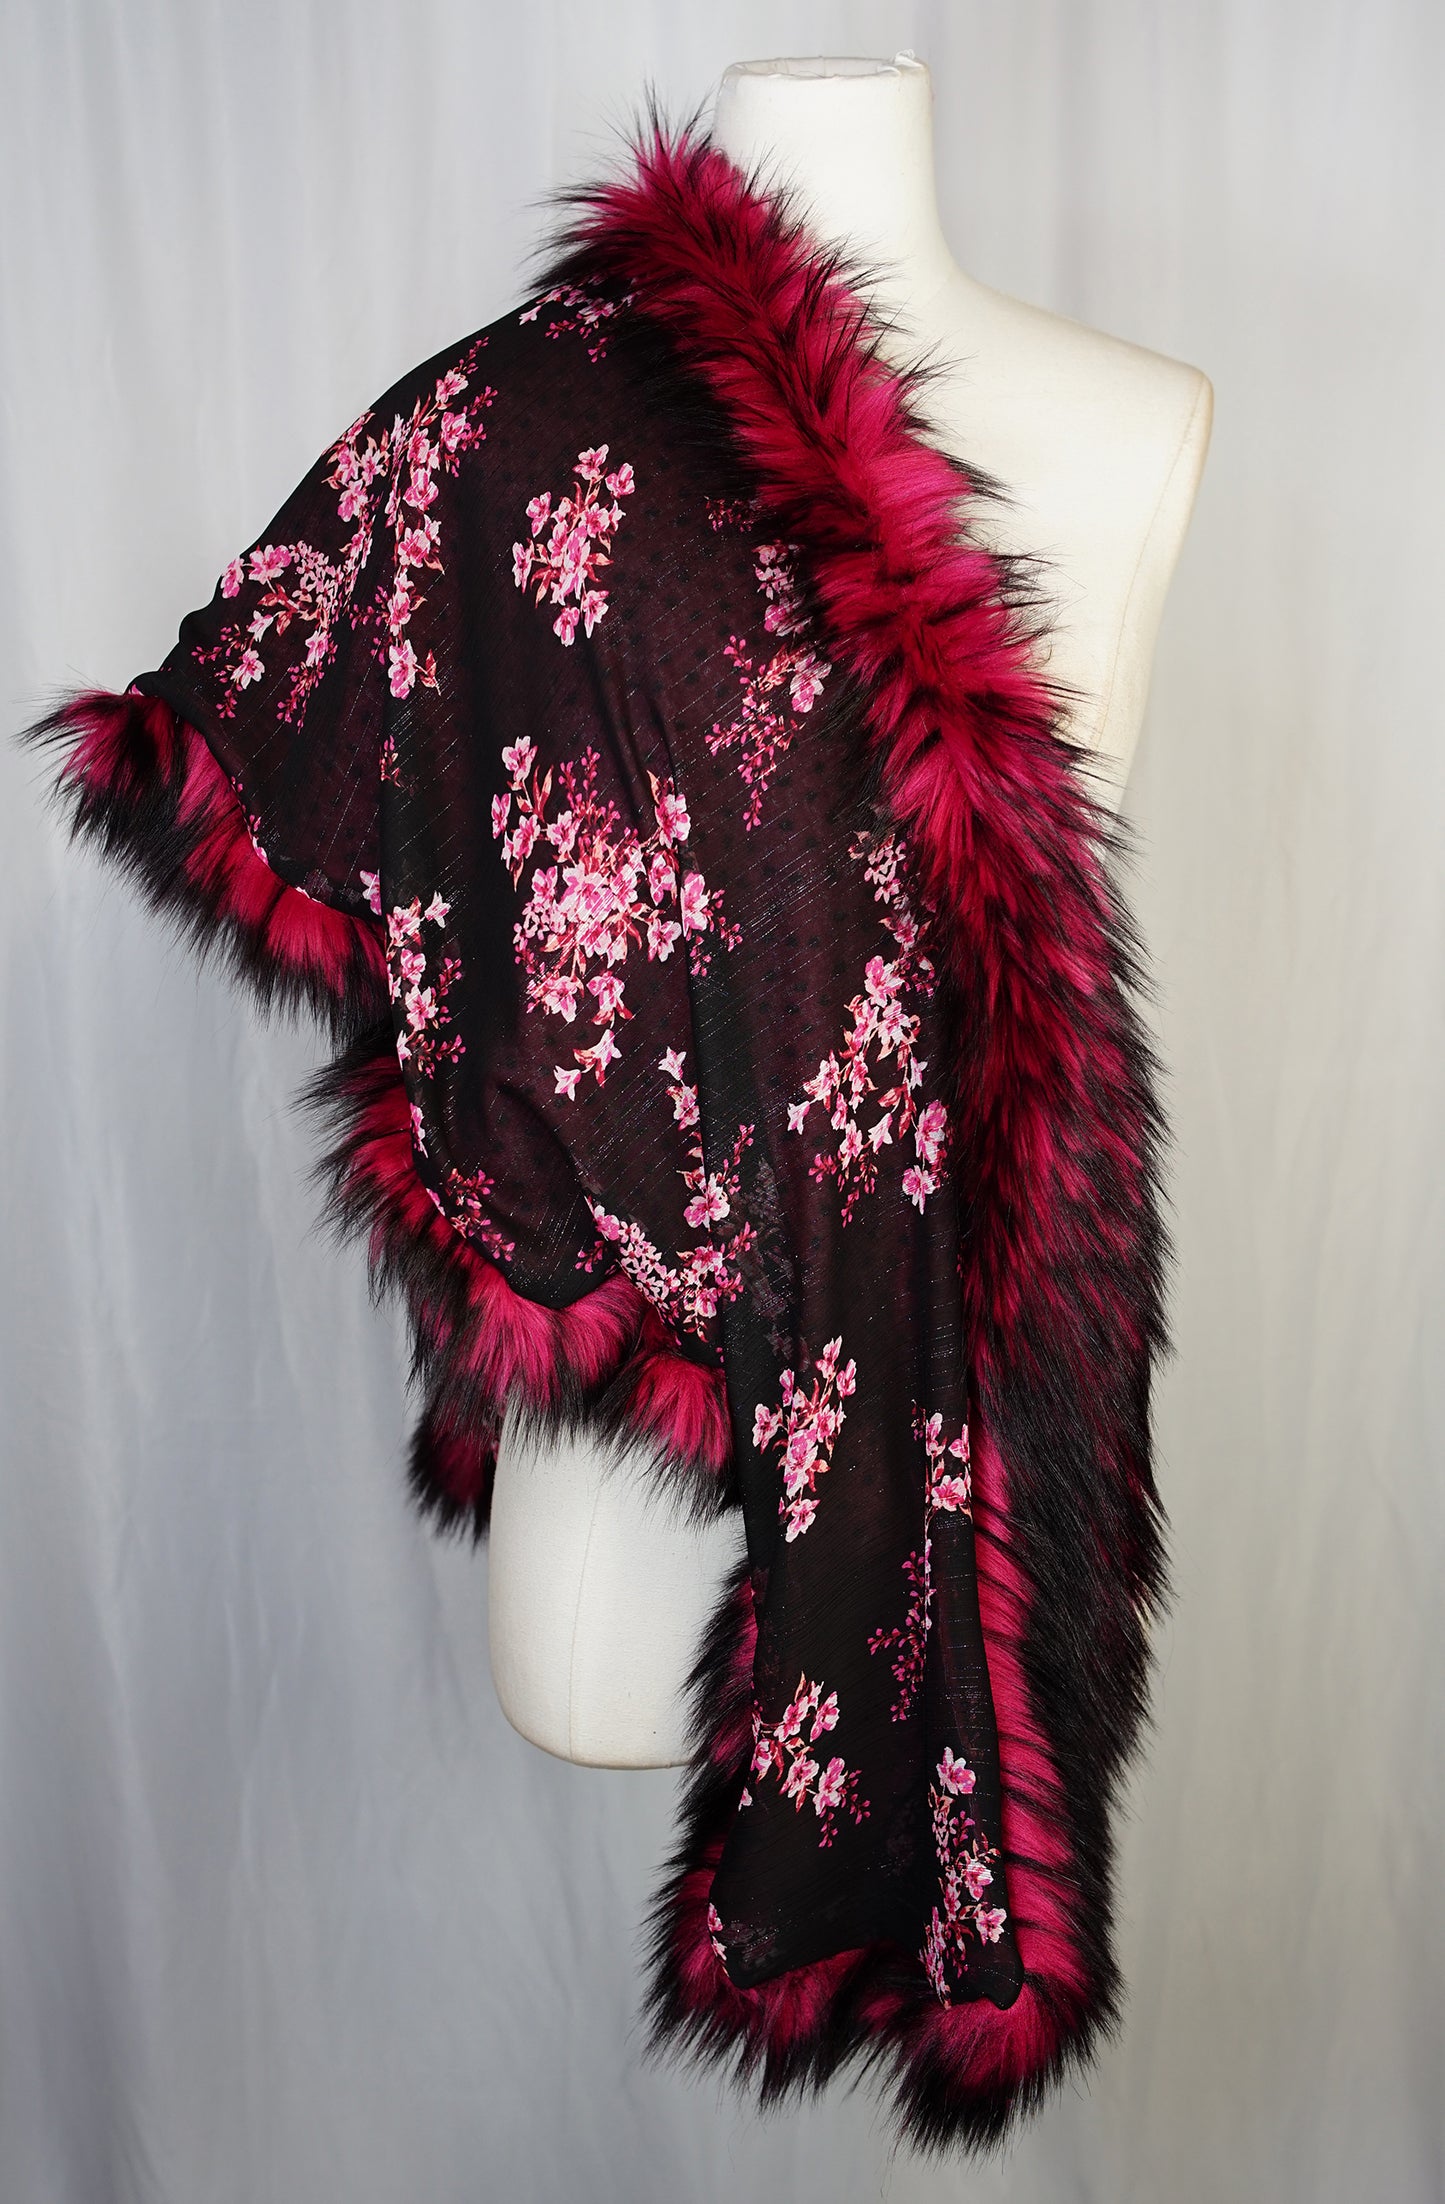 jennafer grace Sangre faux fur shawl red black vegan fur with silky cherry blossom floral lining collar accessory layering almost famous penny lane luxe boho bohemian hippie unisex handmade